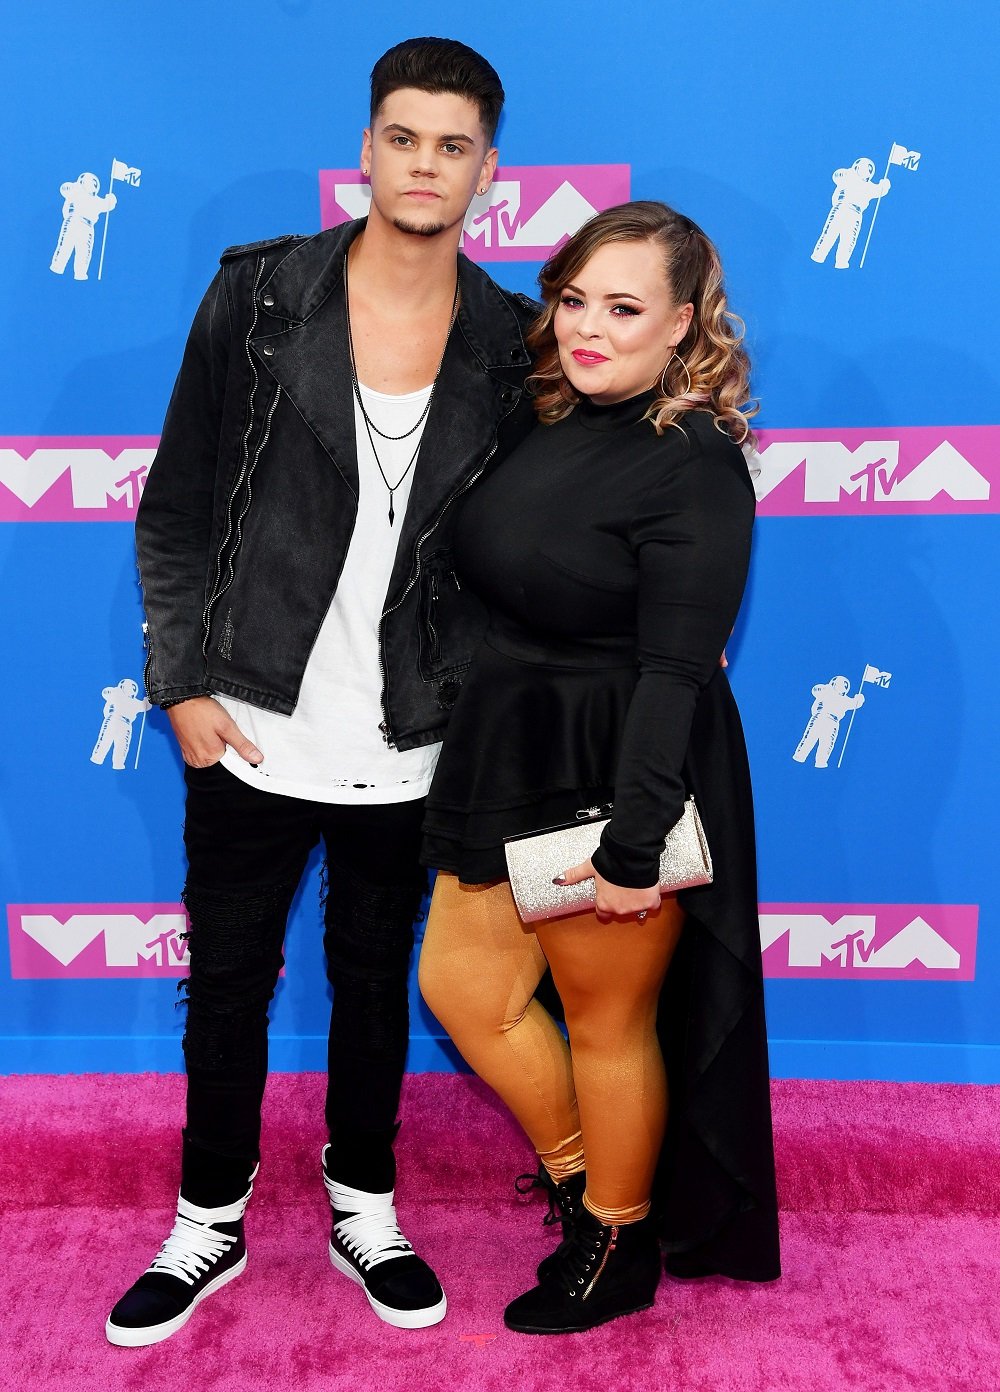 Tyler Baltierra and Catelynn Lowell attending the 2018 MTV Video Music Awards at Radio City Music Hall in New York City in August 2018. | Image: Getty Images.